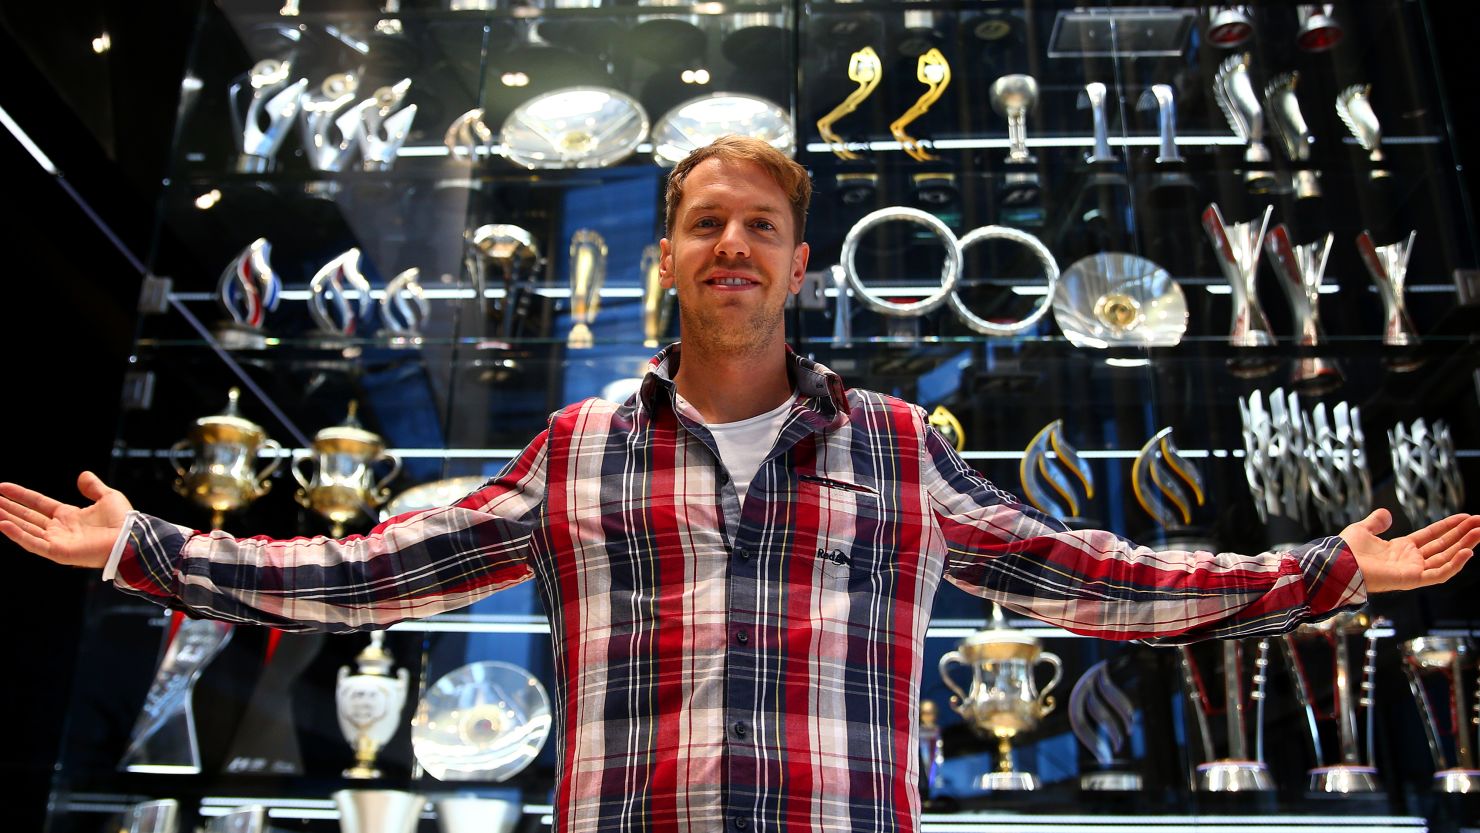 Four time world champion Sebastian Vettel stands in front of Red Bull's trophy cabinet which has been cleared out by burglars